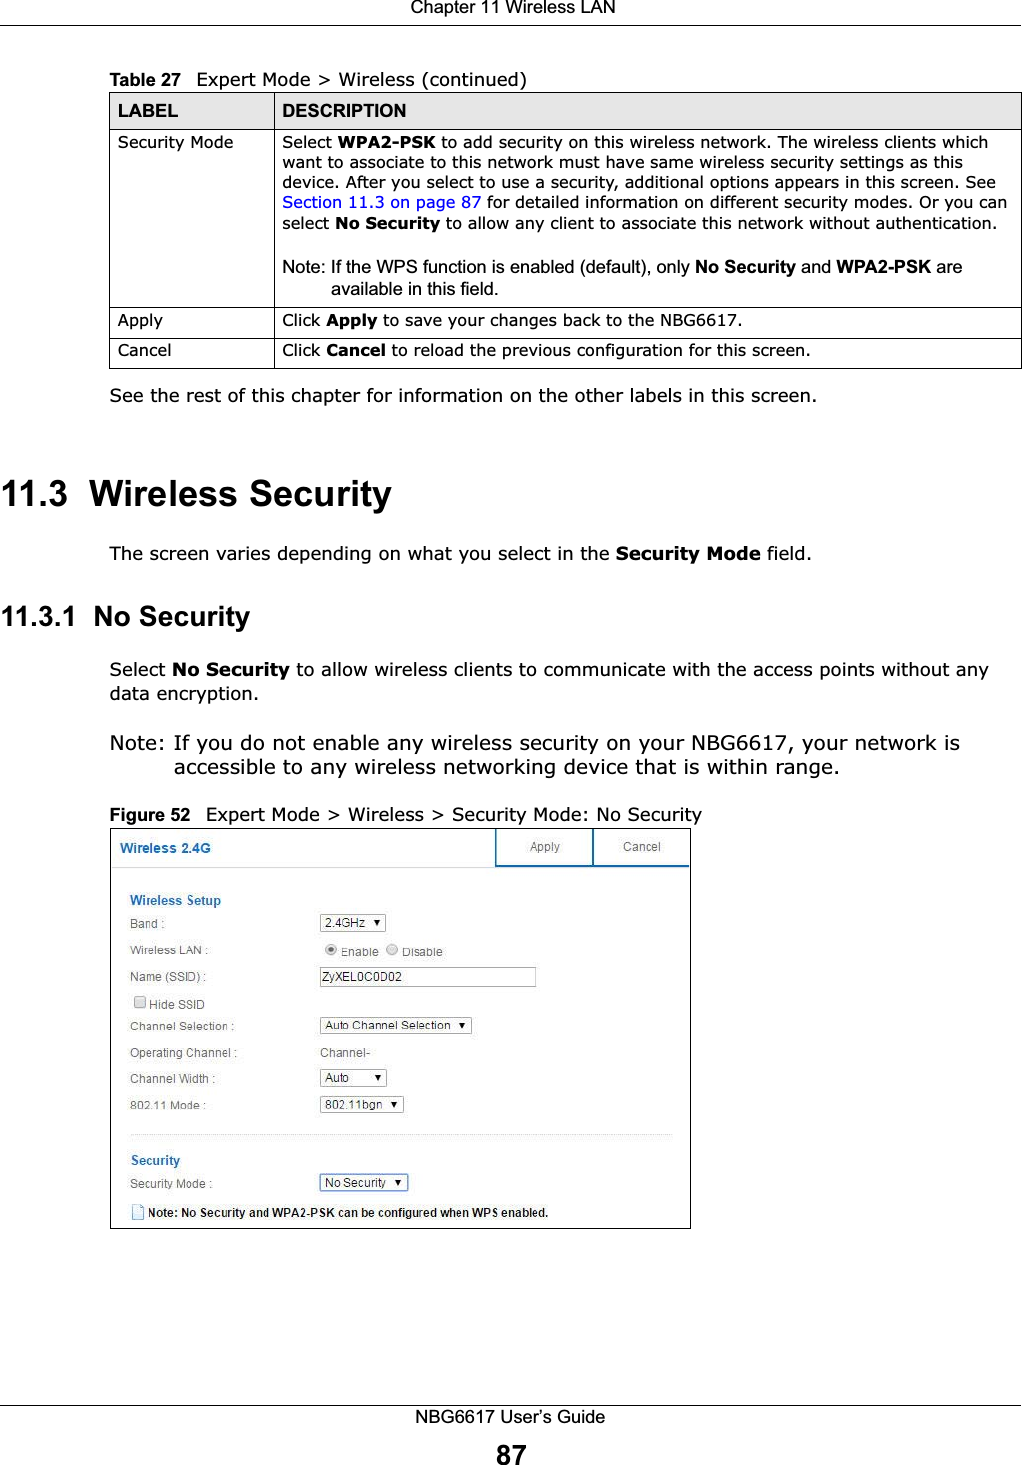  Chapter 11 Wireless LANNBG6617 User’s Guide87See the rest of this chapter for information on the other labels in this screen. 11.3  Wireless SecurityThe screen varies depending on what you select in the Security Mode field.11.3.1  No SecuritySelect No Security to allow wireless clients to communicate with the access points without any data encryption.Note: If you do not enable any wireless security on your NBG6617, your network is accessible to any wireless networking device that is within range.Figure 52   Expert Mode &gt; Wireless &gt; Security Mode: No SecuritySecurity Mode Select WPA2-PSK to add security on this wireless network. The wireless clients which want to associate to this network must have same wireless security settings as this device. After you select to use a security, additional options appears in this screen. See Section 11.3 on page 87 for detailed information on different security modes. Or you can select No Security to allow any client to associate this network without authentication.Note: If the WPS function is enabled (default), only No Security and WPA2-PSK are available in this field.Apply Click Apply to save your changes back to the NBG6617.Cancel Click Cancel to reload the previous configuration for this screen.Table 27   Expert Mode &gt; Wireless (continued) LABEL DESCRIPTION